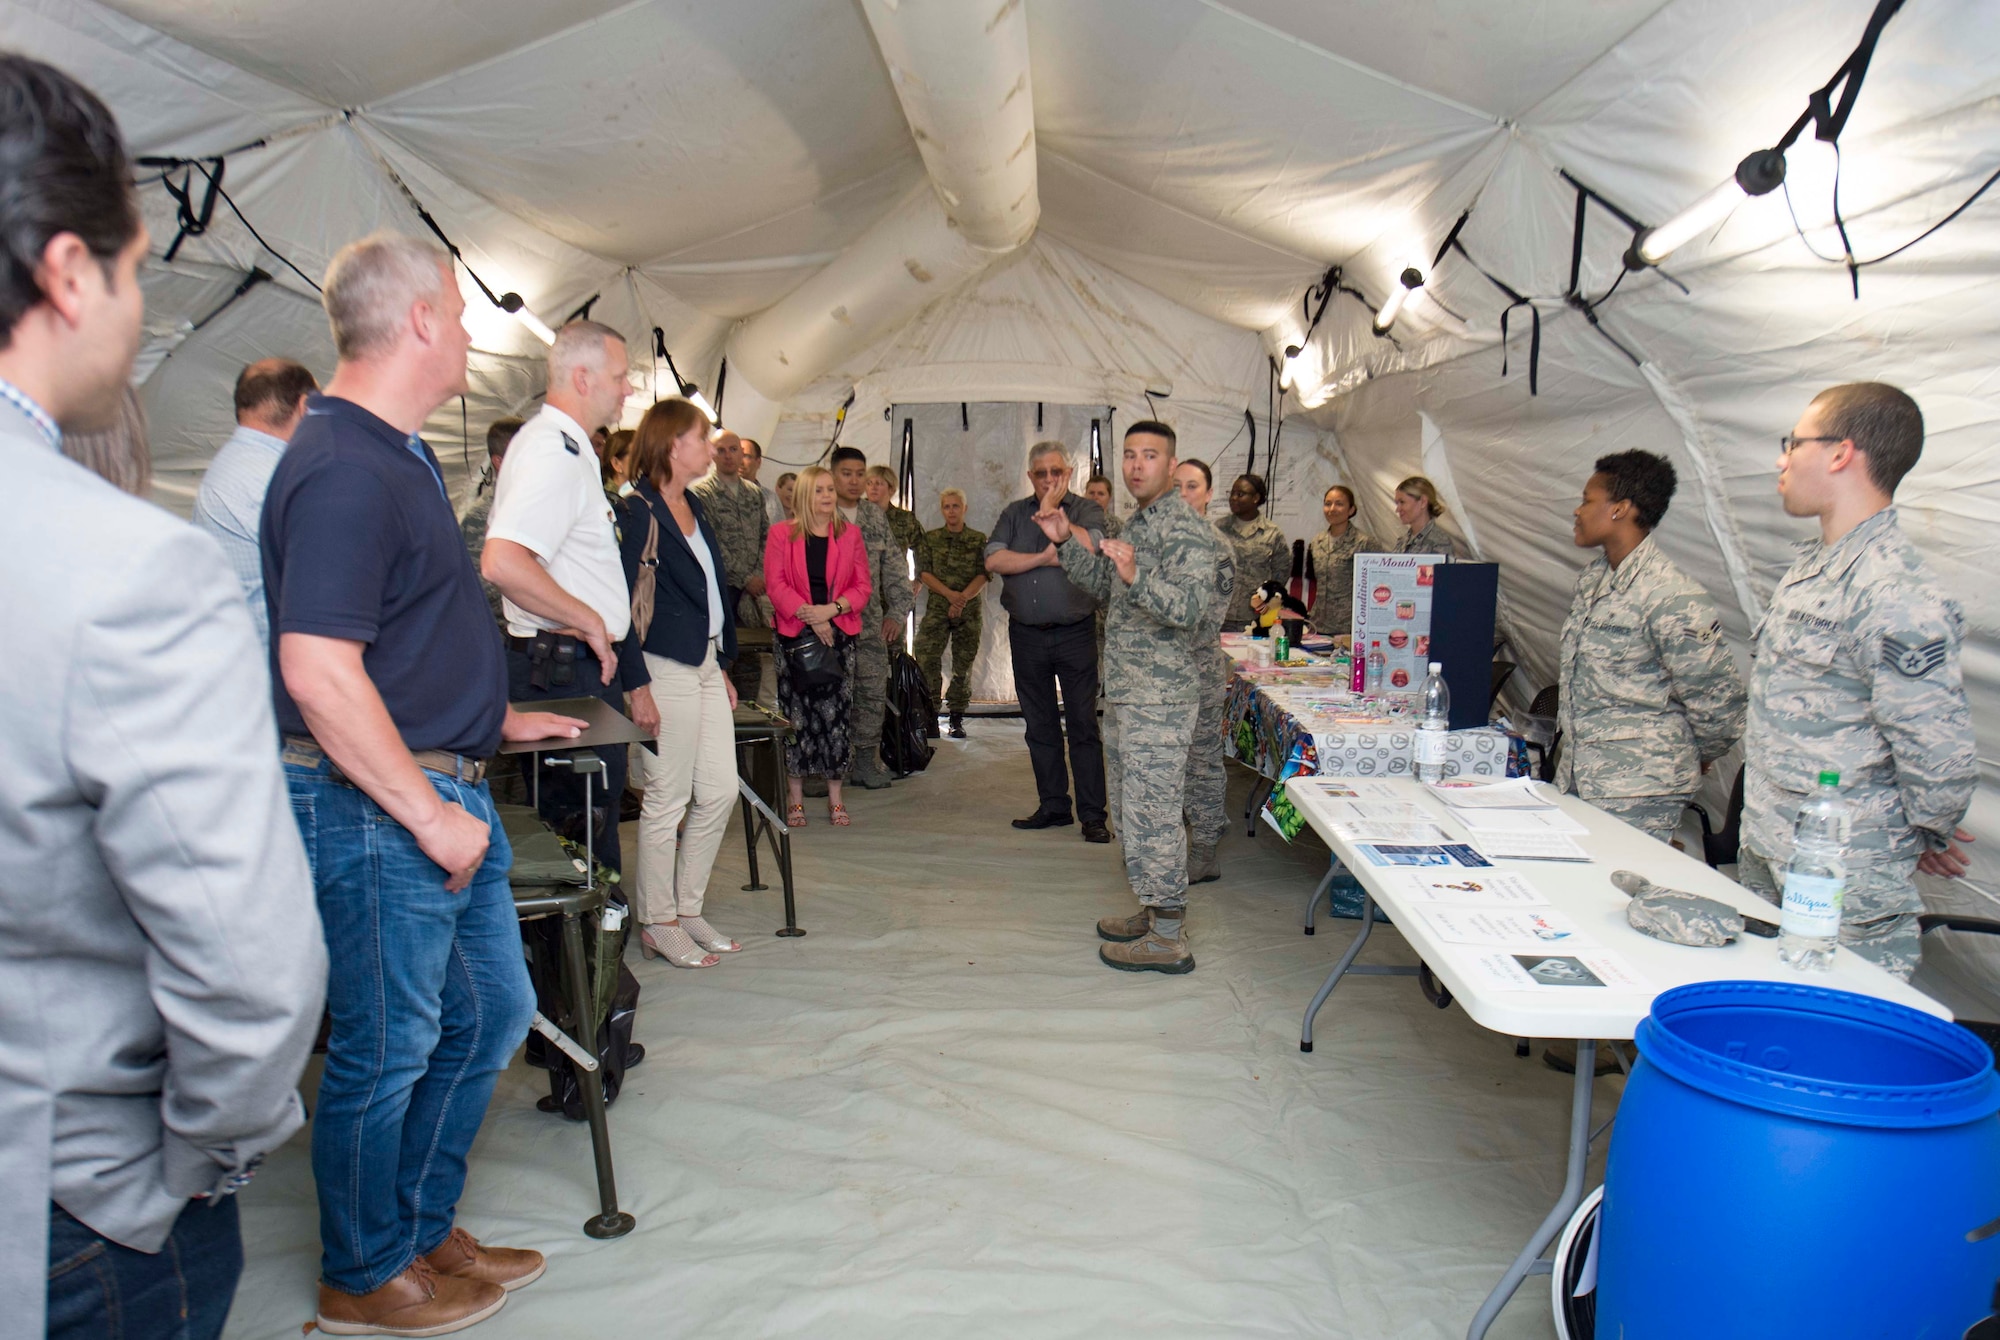 U.S. Air Force Capt. Ricardo Aldahondo, middle, 86th Medical Support Squadron Resource Management Flight commander, gives a tour of an Air Force Expeditionary Medical System to host nation distinguished visitors during the 86th Medical Group's exercise Maroon Surge Community Outreach Day on Ramstein Air Base, Germany, June 7, 2018. An EMEDS is a deployable medical unit, like a tent-hospital, that is fully equipped and has rooms that can be added and removed. Ramstein welcomed visitors to tour the facilities to educate the public about Air Force capabilities, promote openness, and strengthen relations. (U.S. Air Force photo by Senior Airman Elizabeth Baker)